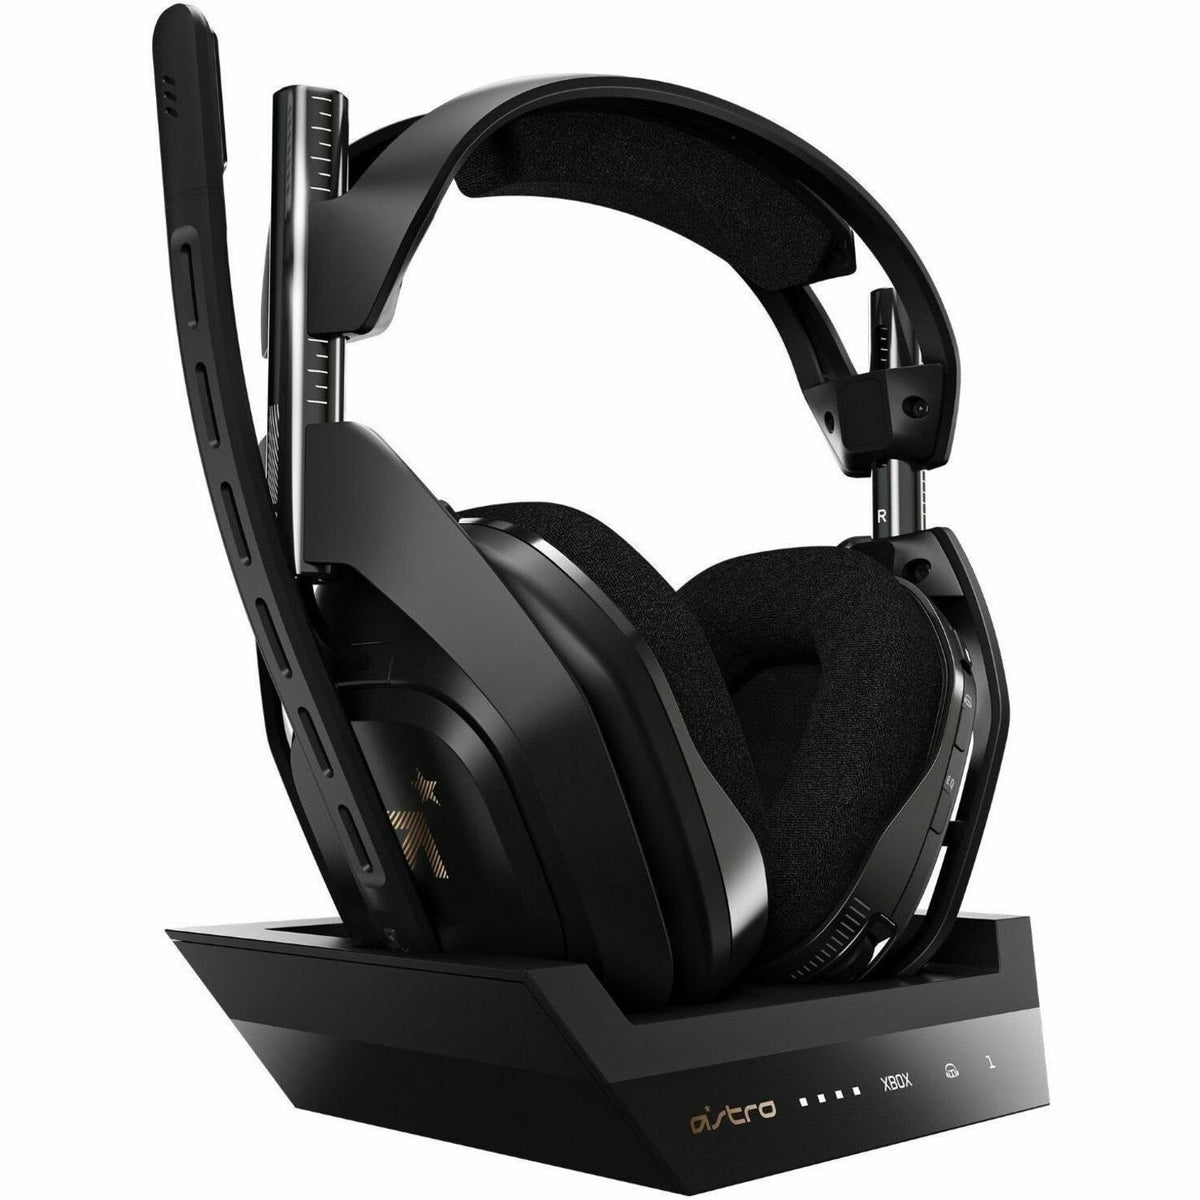 Astro A50 Wireless Headset with Lithium-Ion Battery - 939-001680